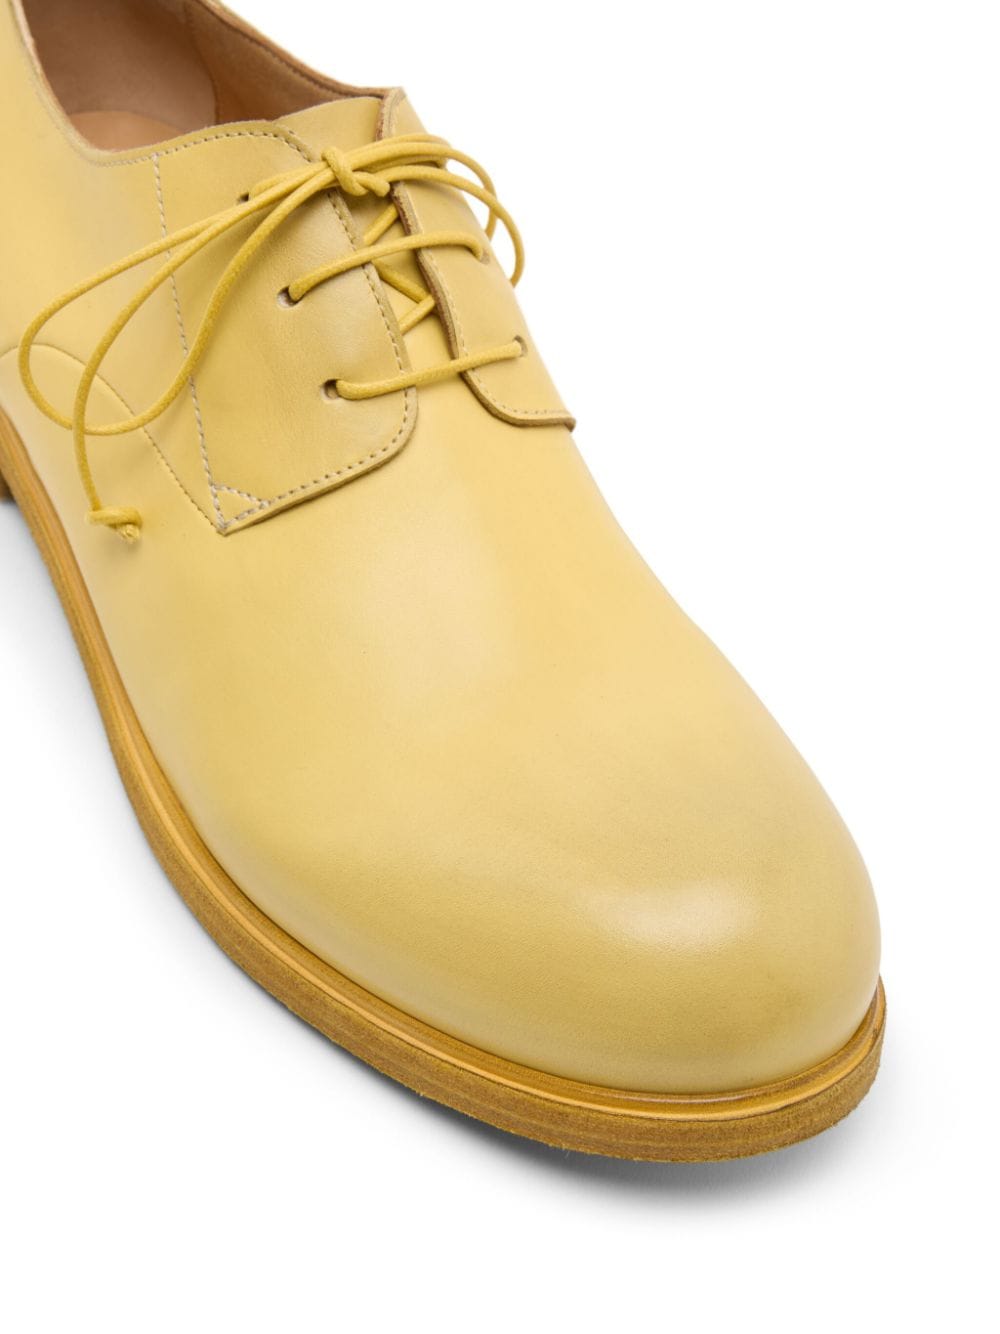 ZUCCA LEATHER DERBY SHOES